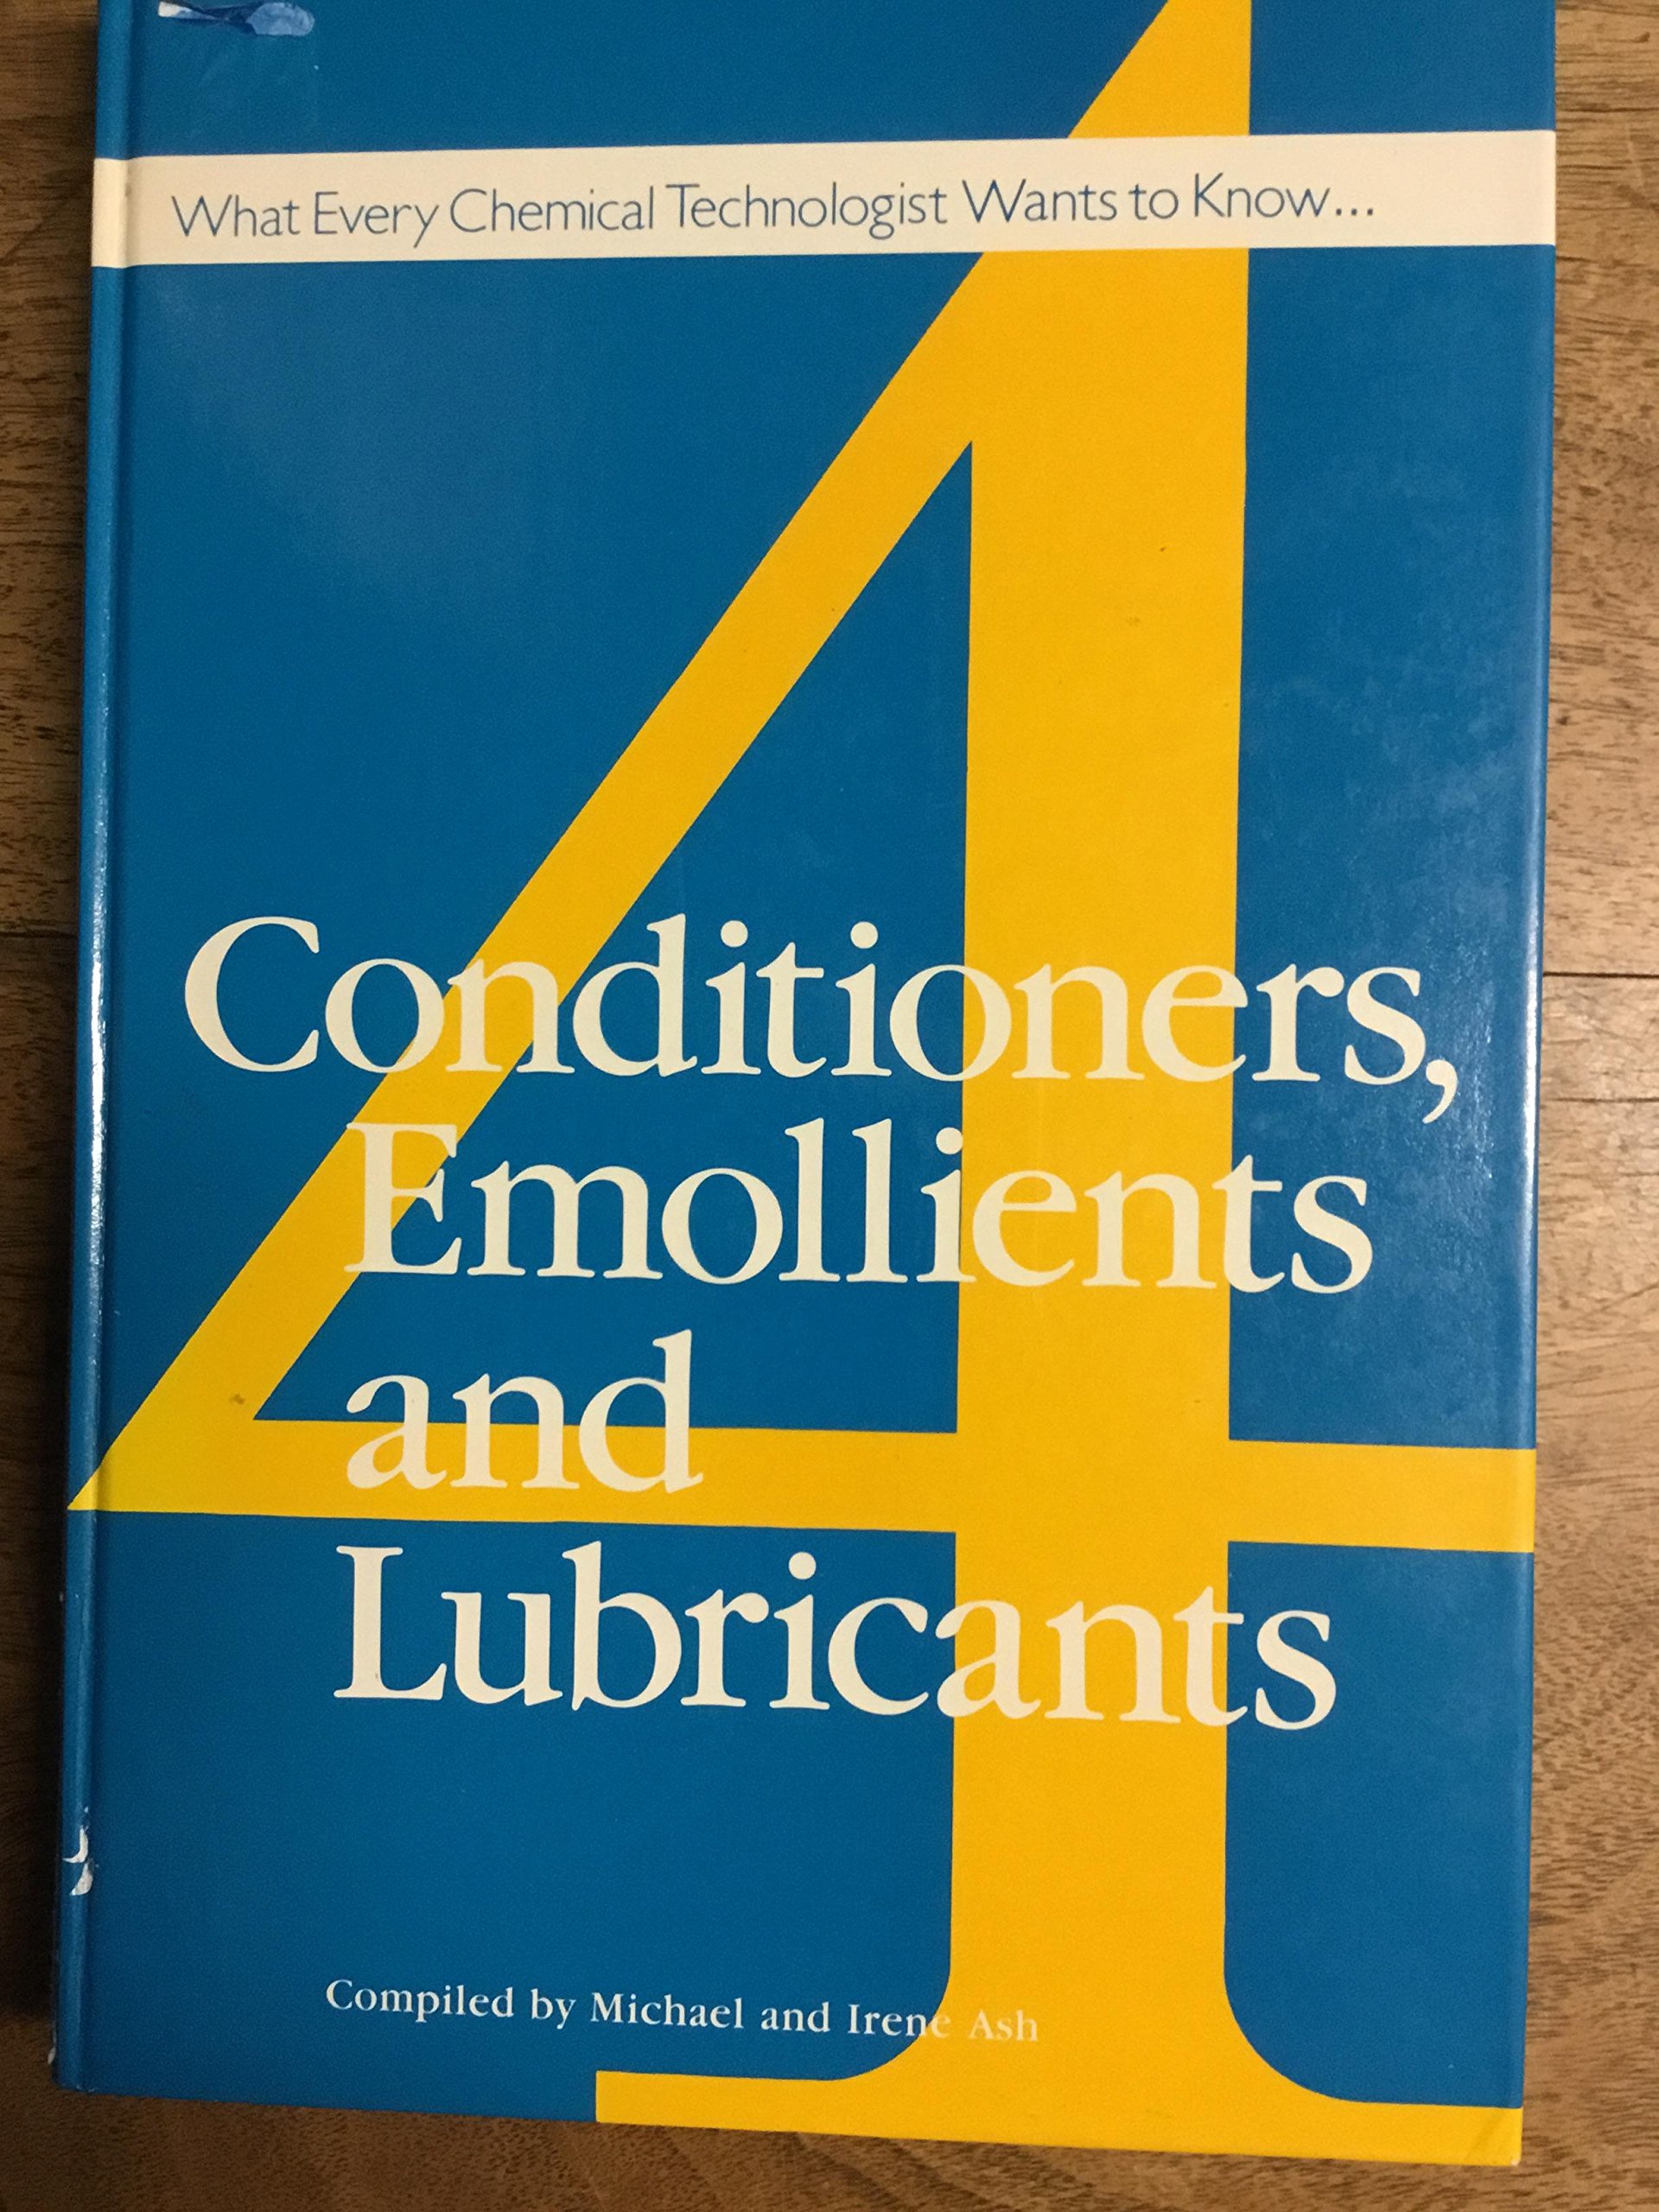 What Every Chemical Technologist Wants to Know: Conditioners, Emollients and Lubricants v. 4